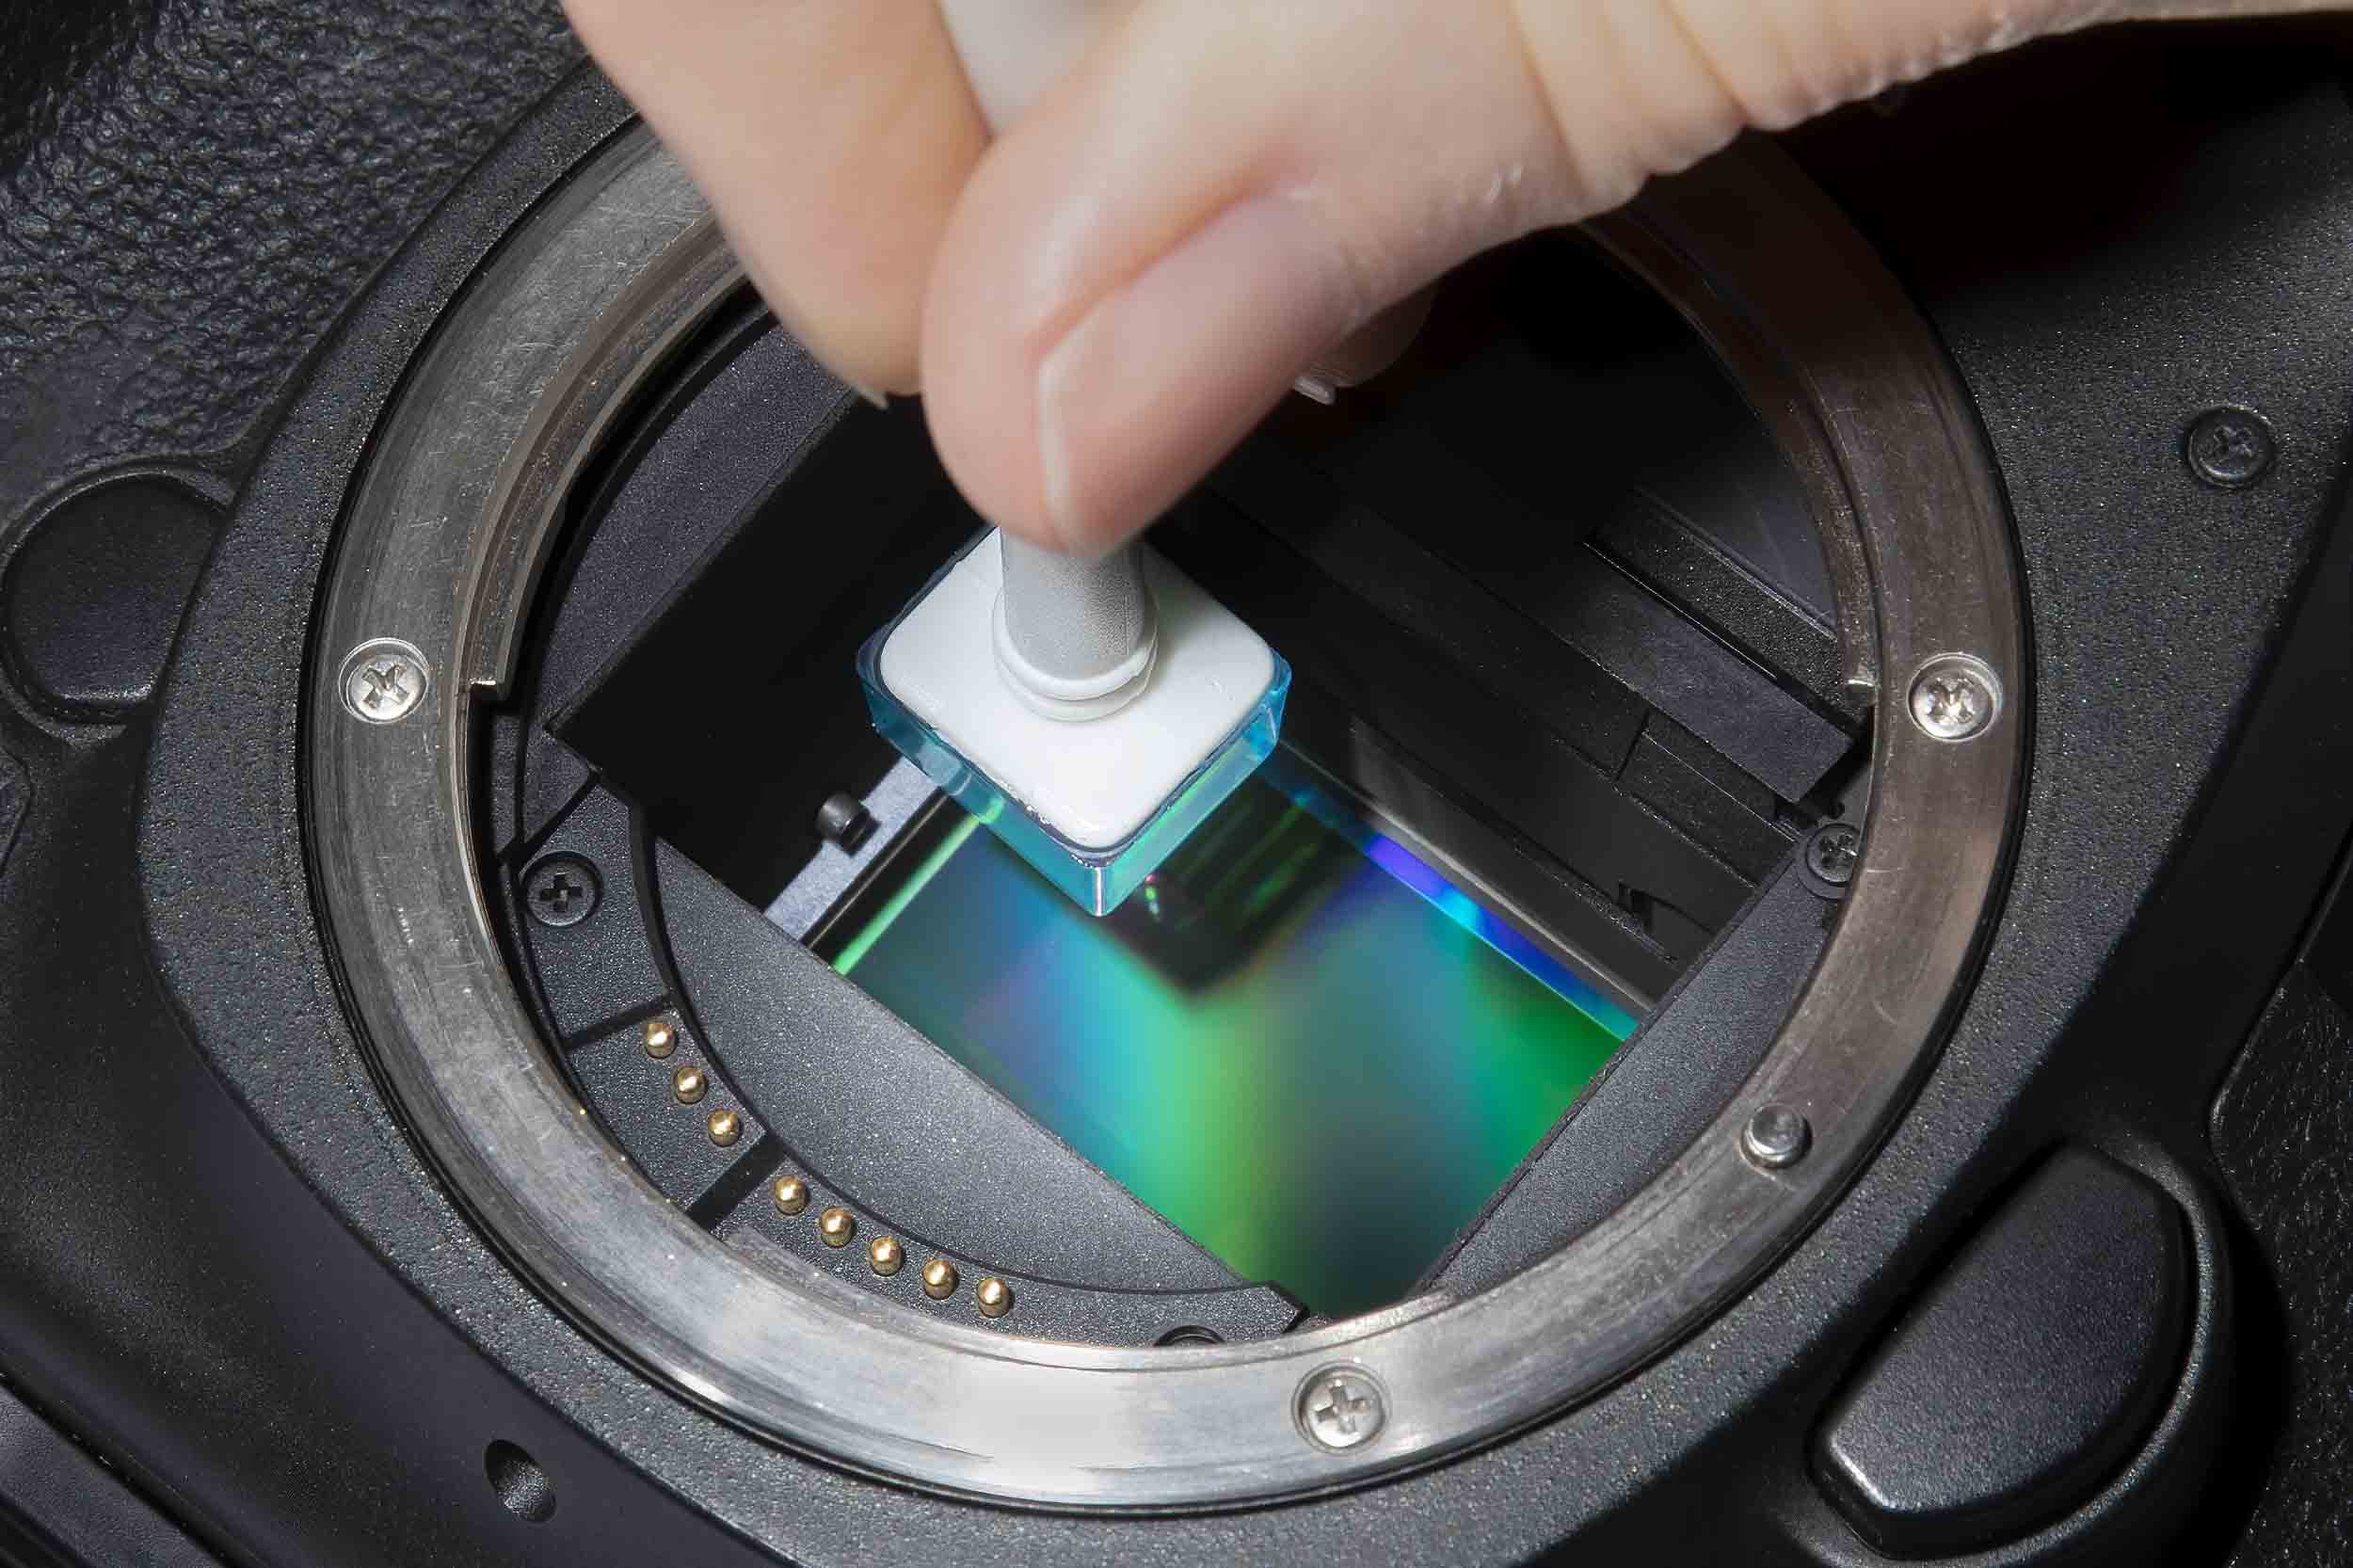 How to clean the camera sensor